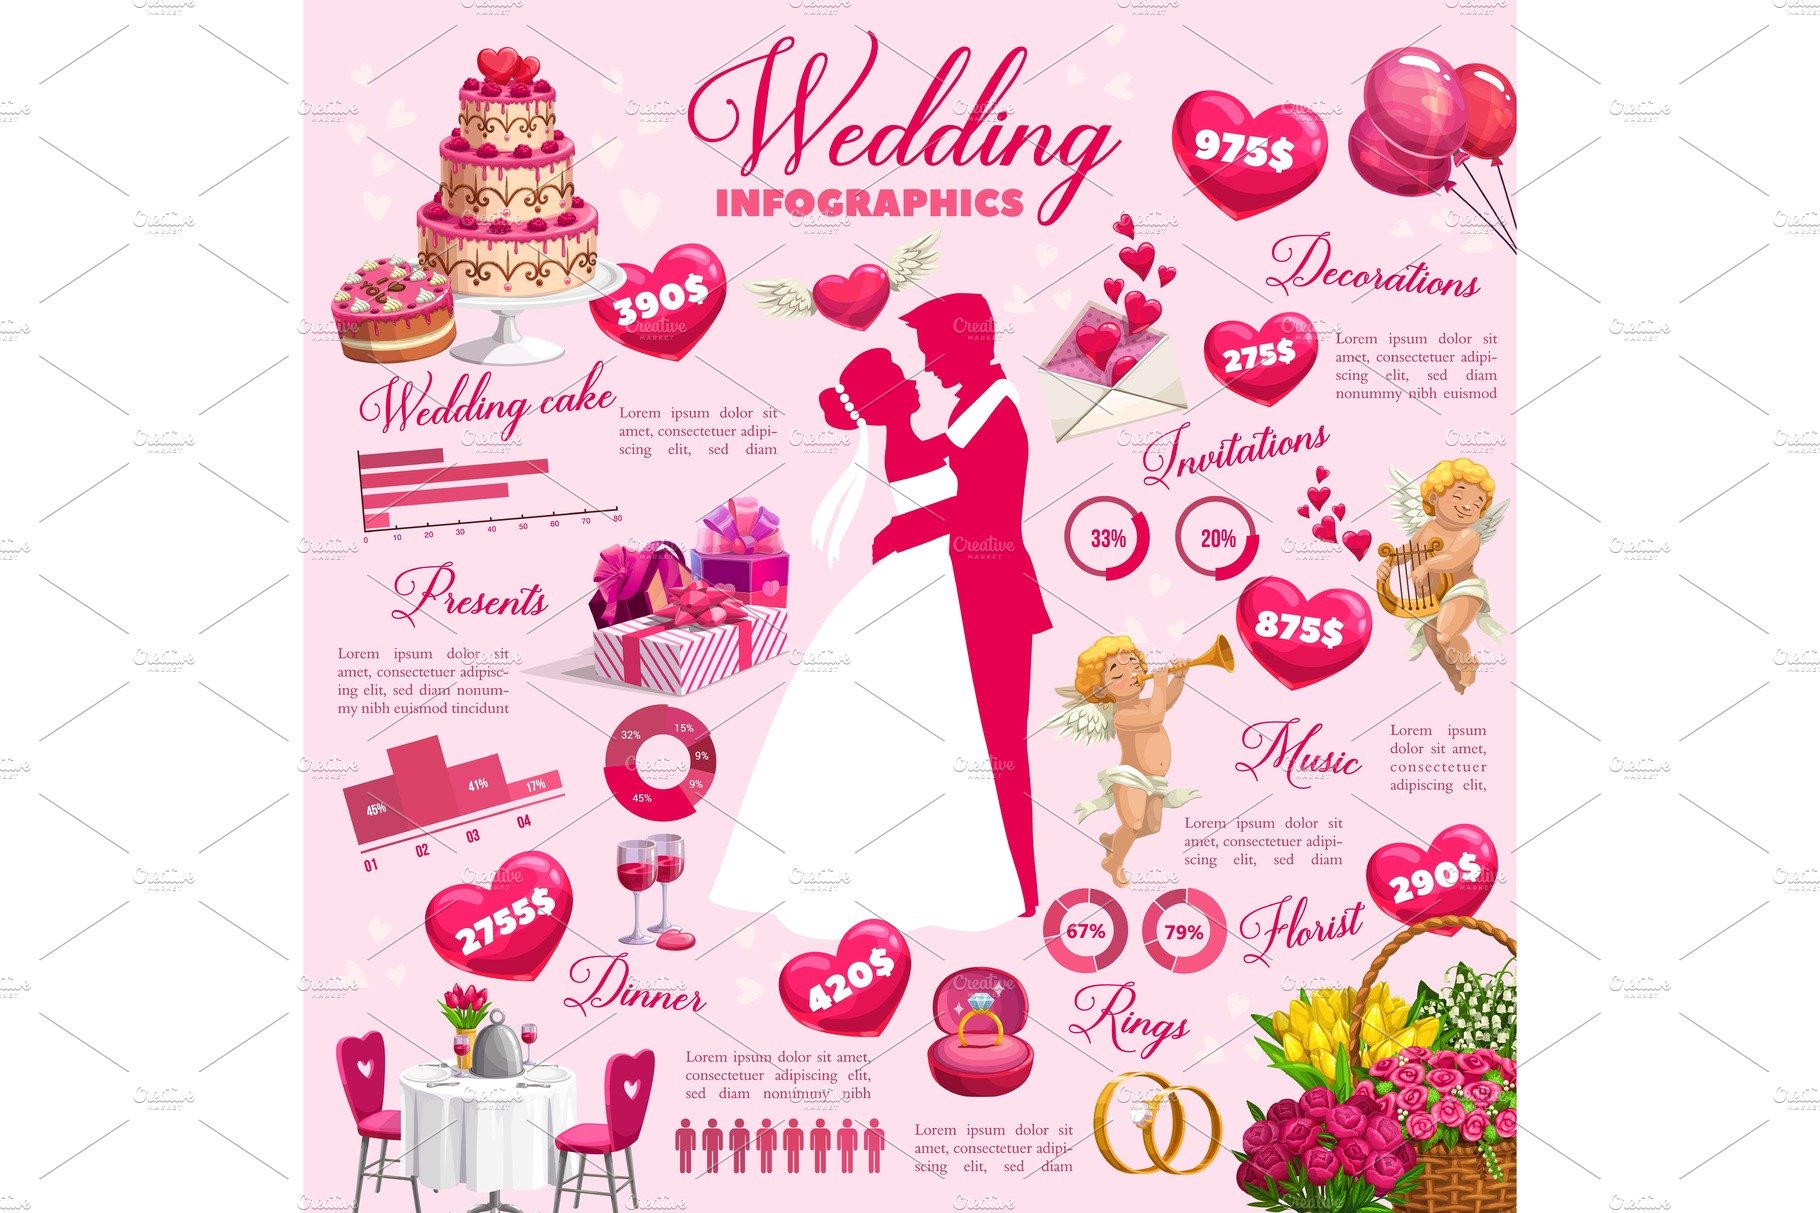 Wediing, marriage infographics cover image.